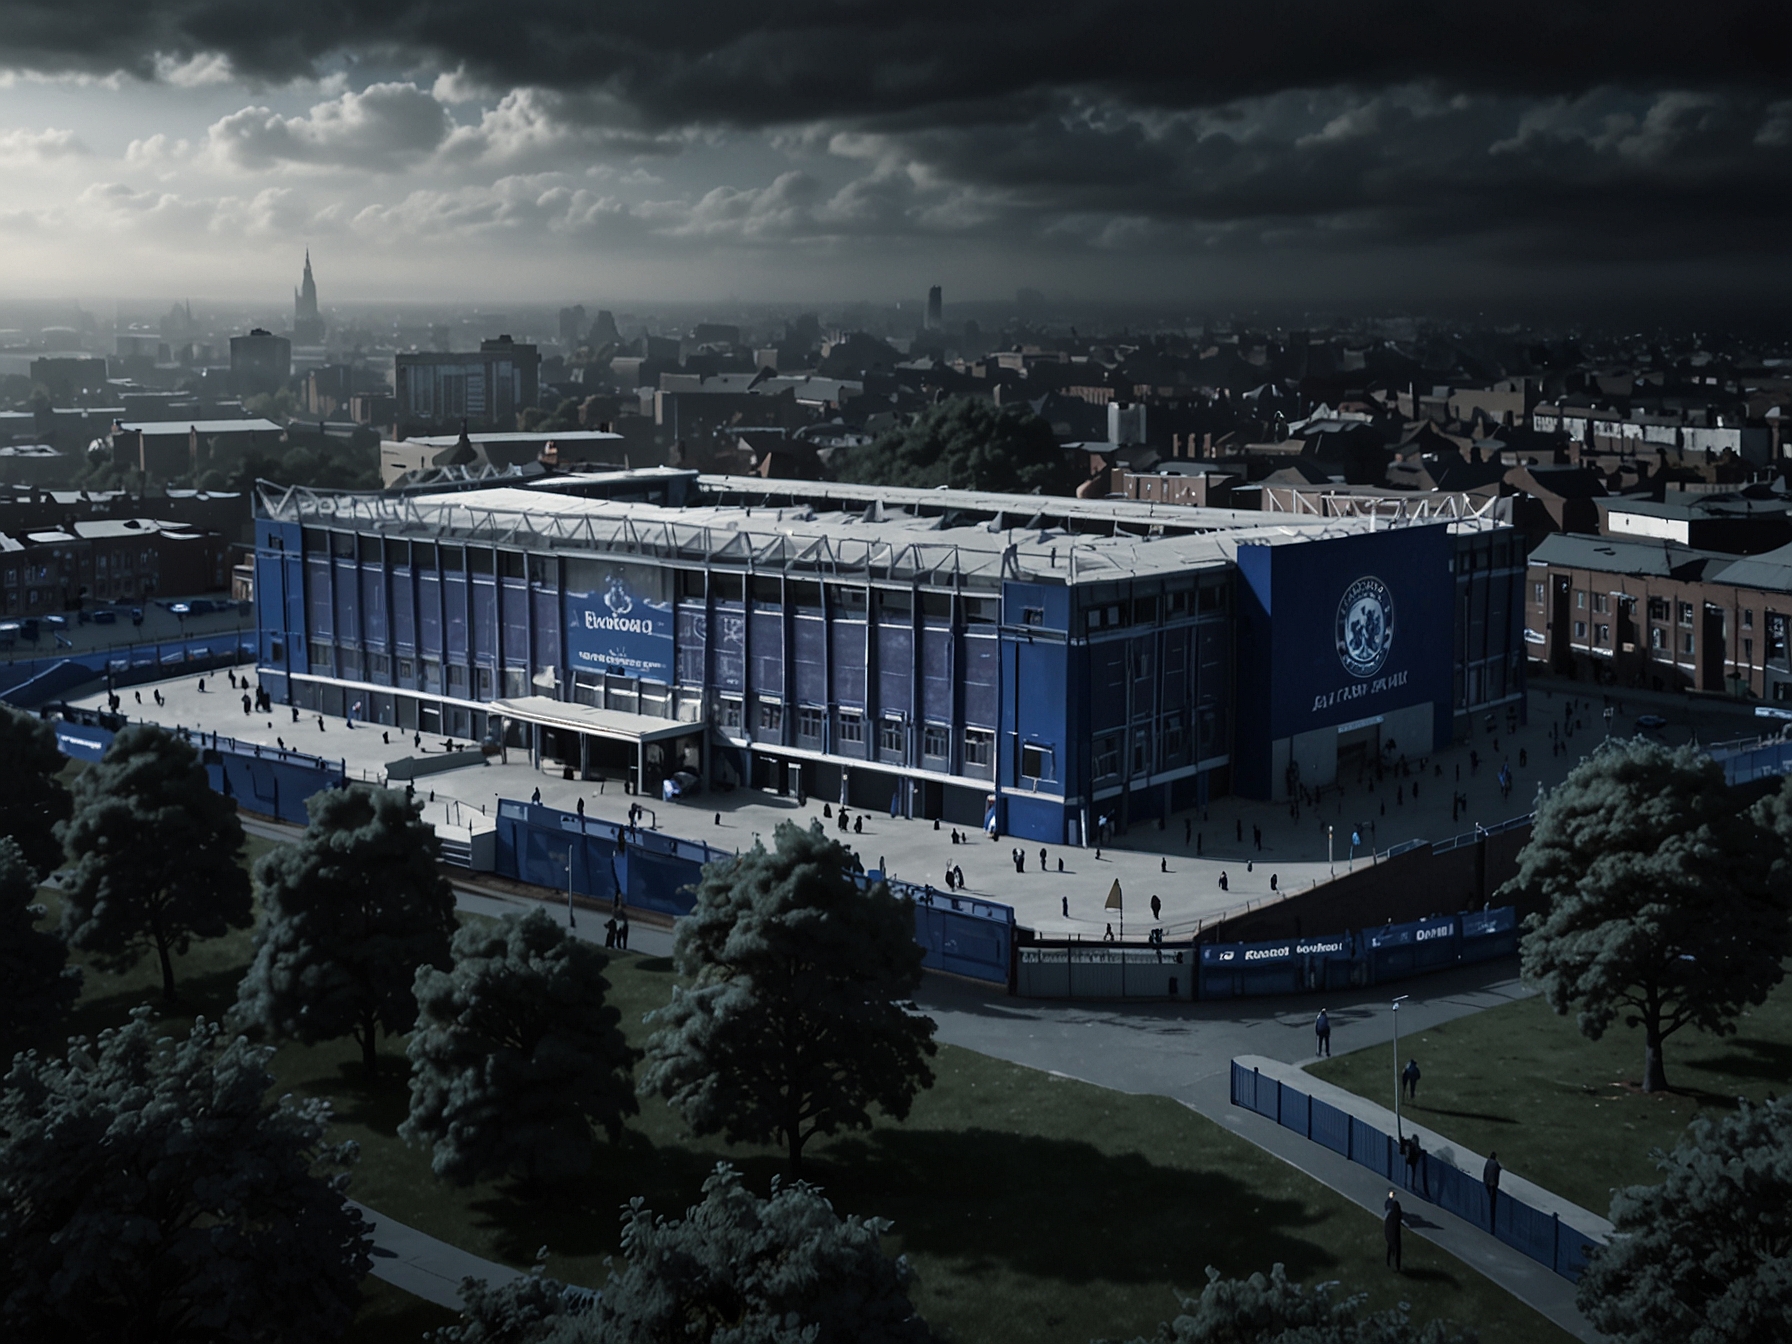 Everton’s Goodison Park stadium with vision icons overlayed. This represents the potential infrastructural improvements and commercial growth that Friedkin could implement if he takes over the club.